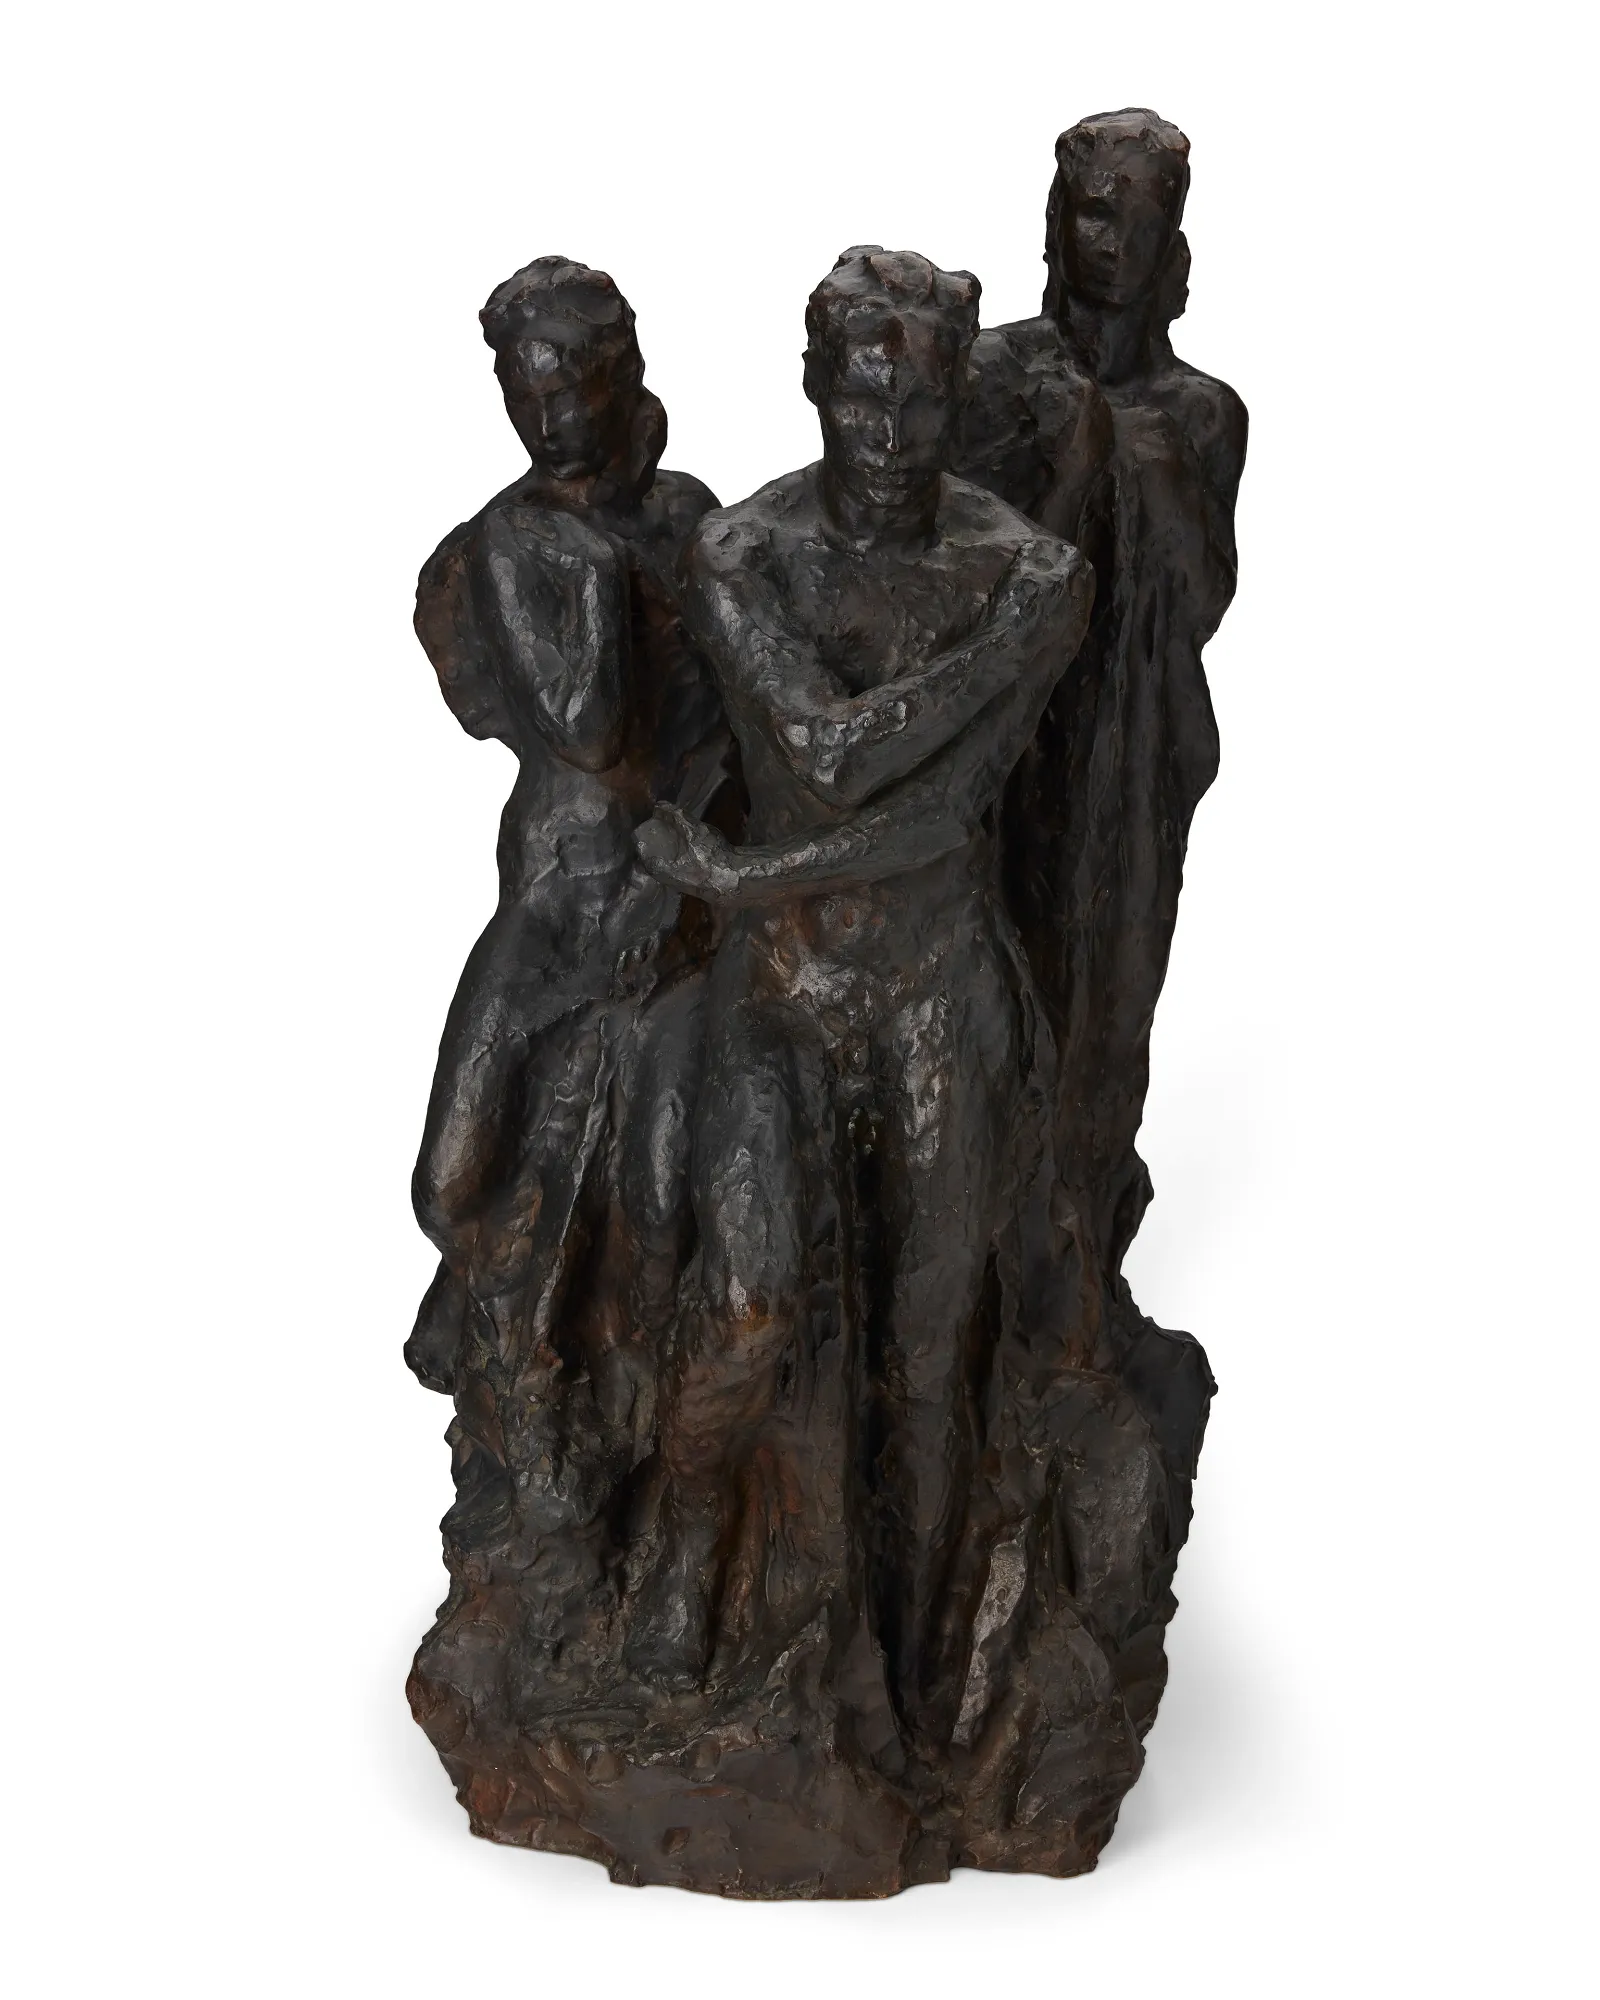 Moran&#8217;s Traditional Collector sale showcases Georg Kolbe Beethoven monument model Sept. 26